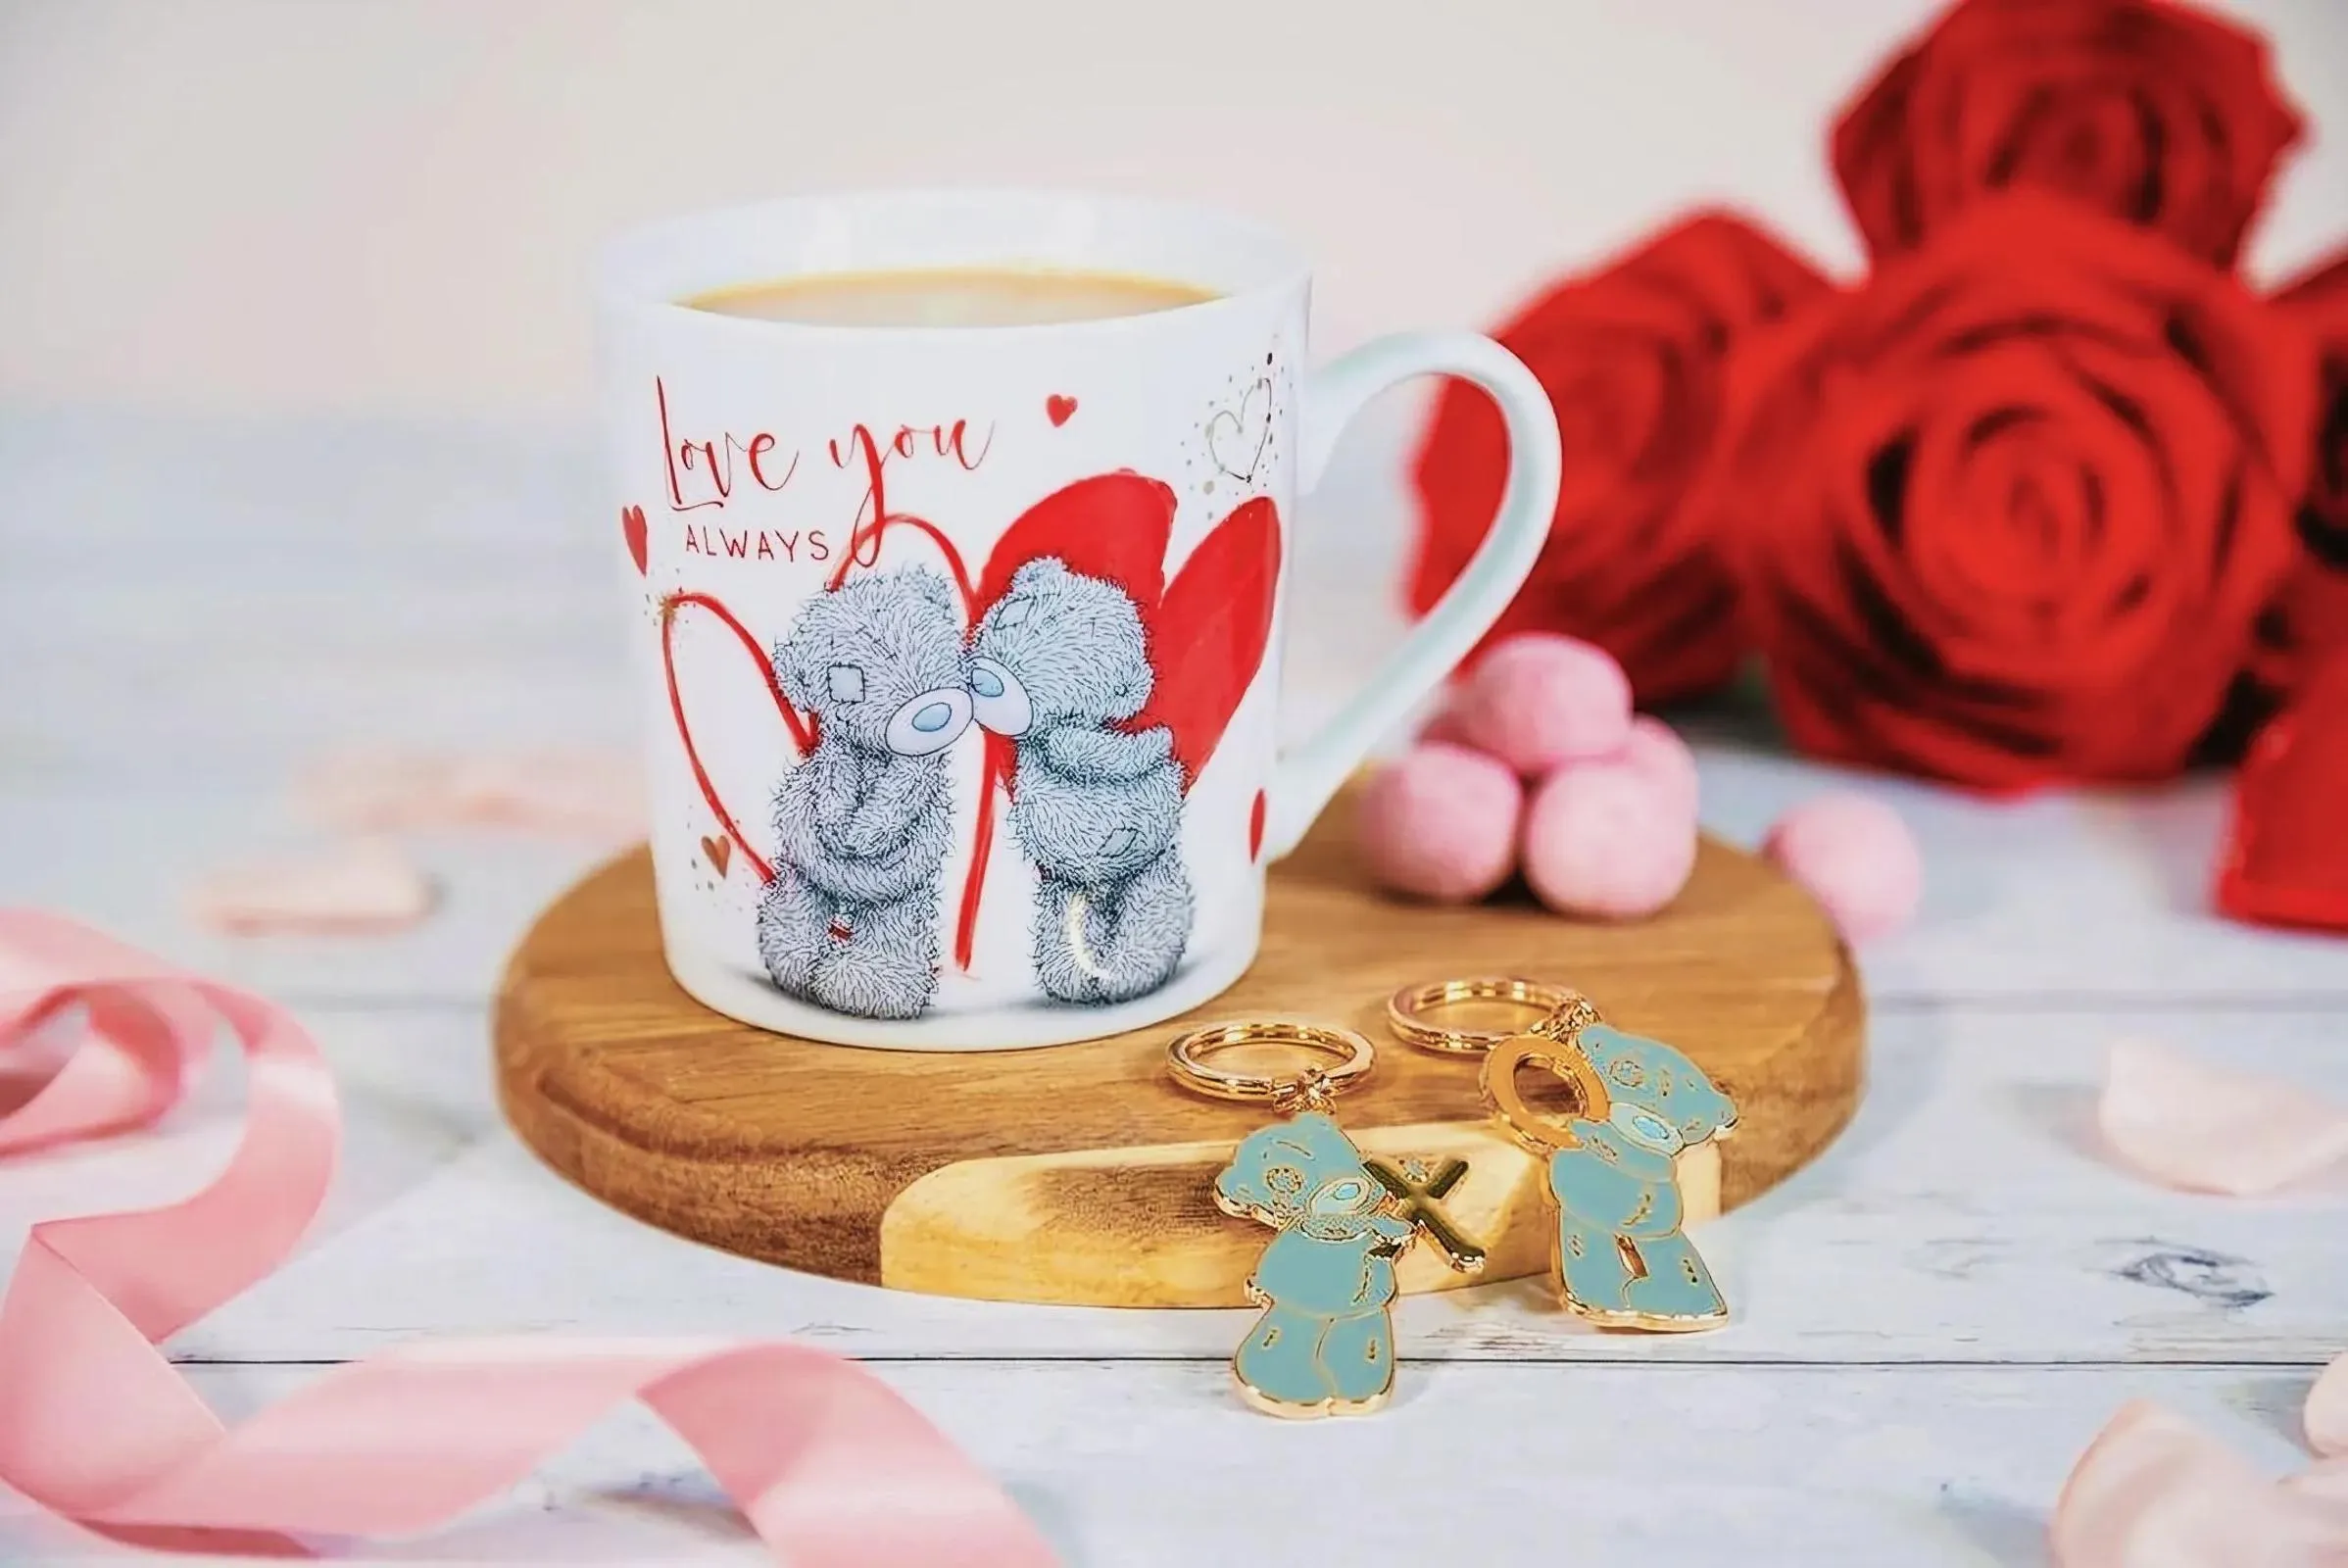 Ceramic coffee mug with teddy bears, gold earrings, and roses on a table